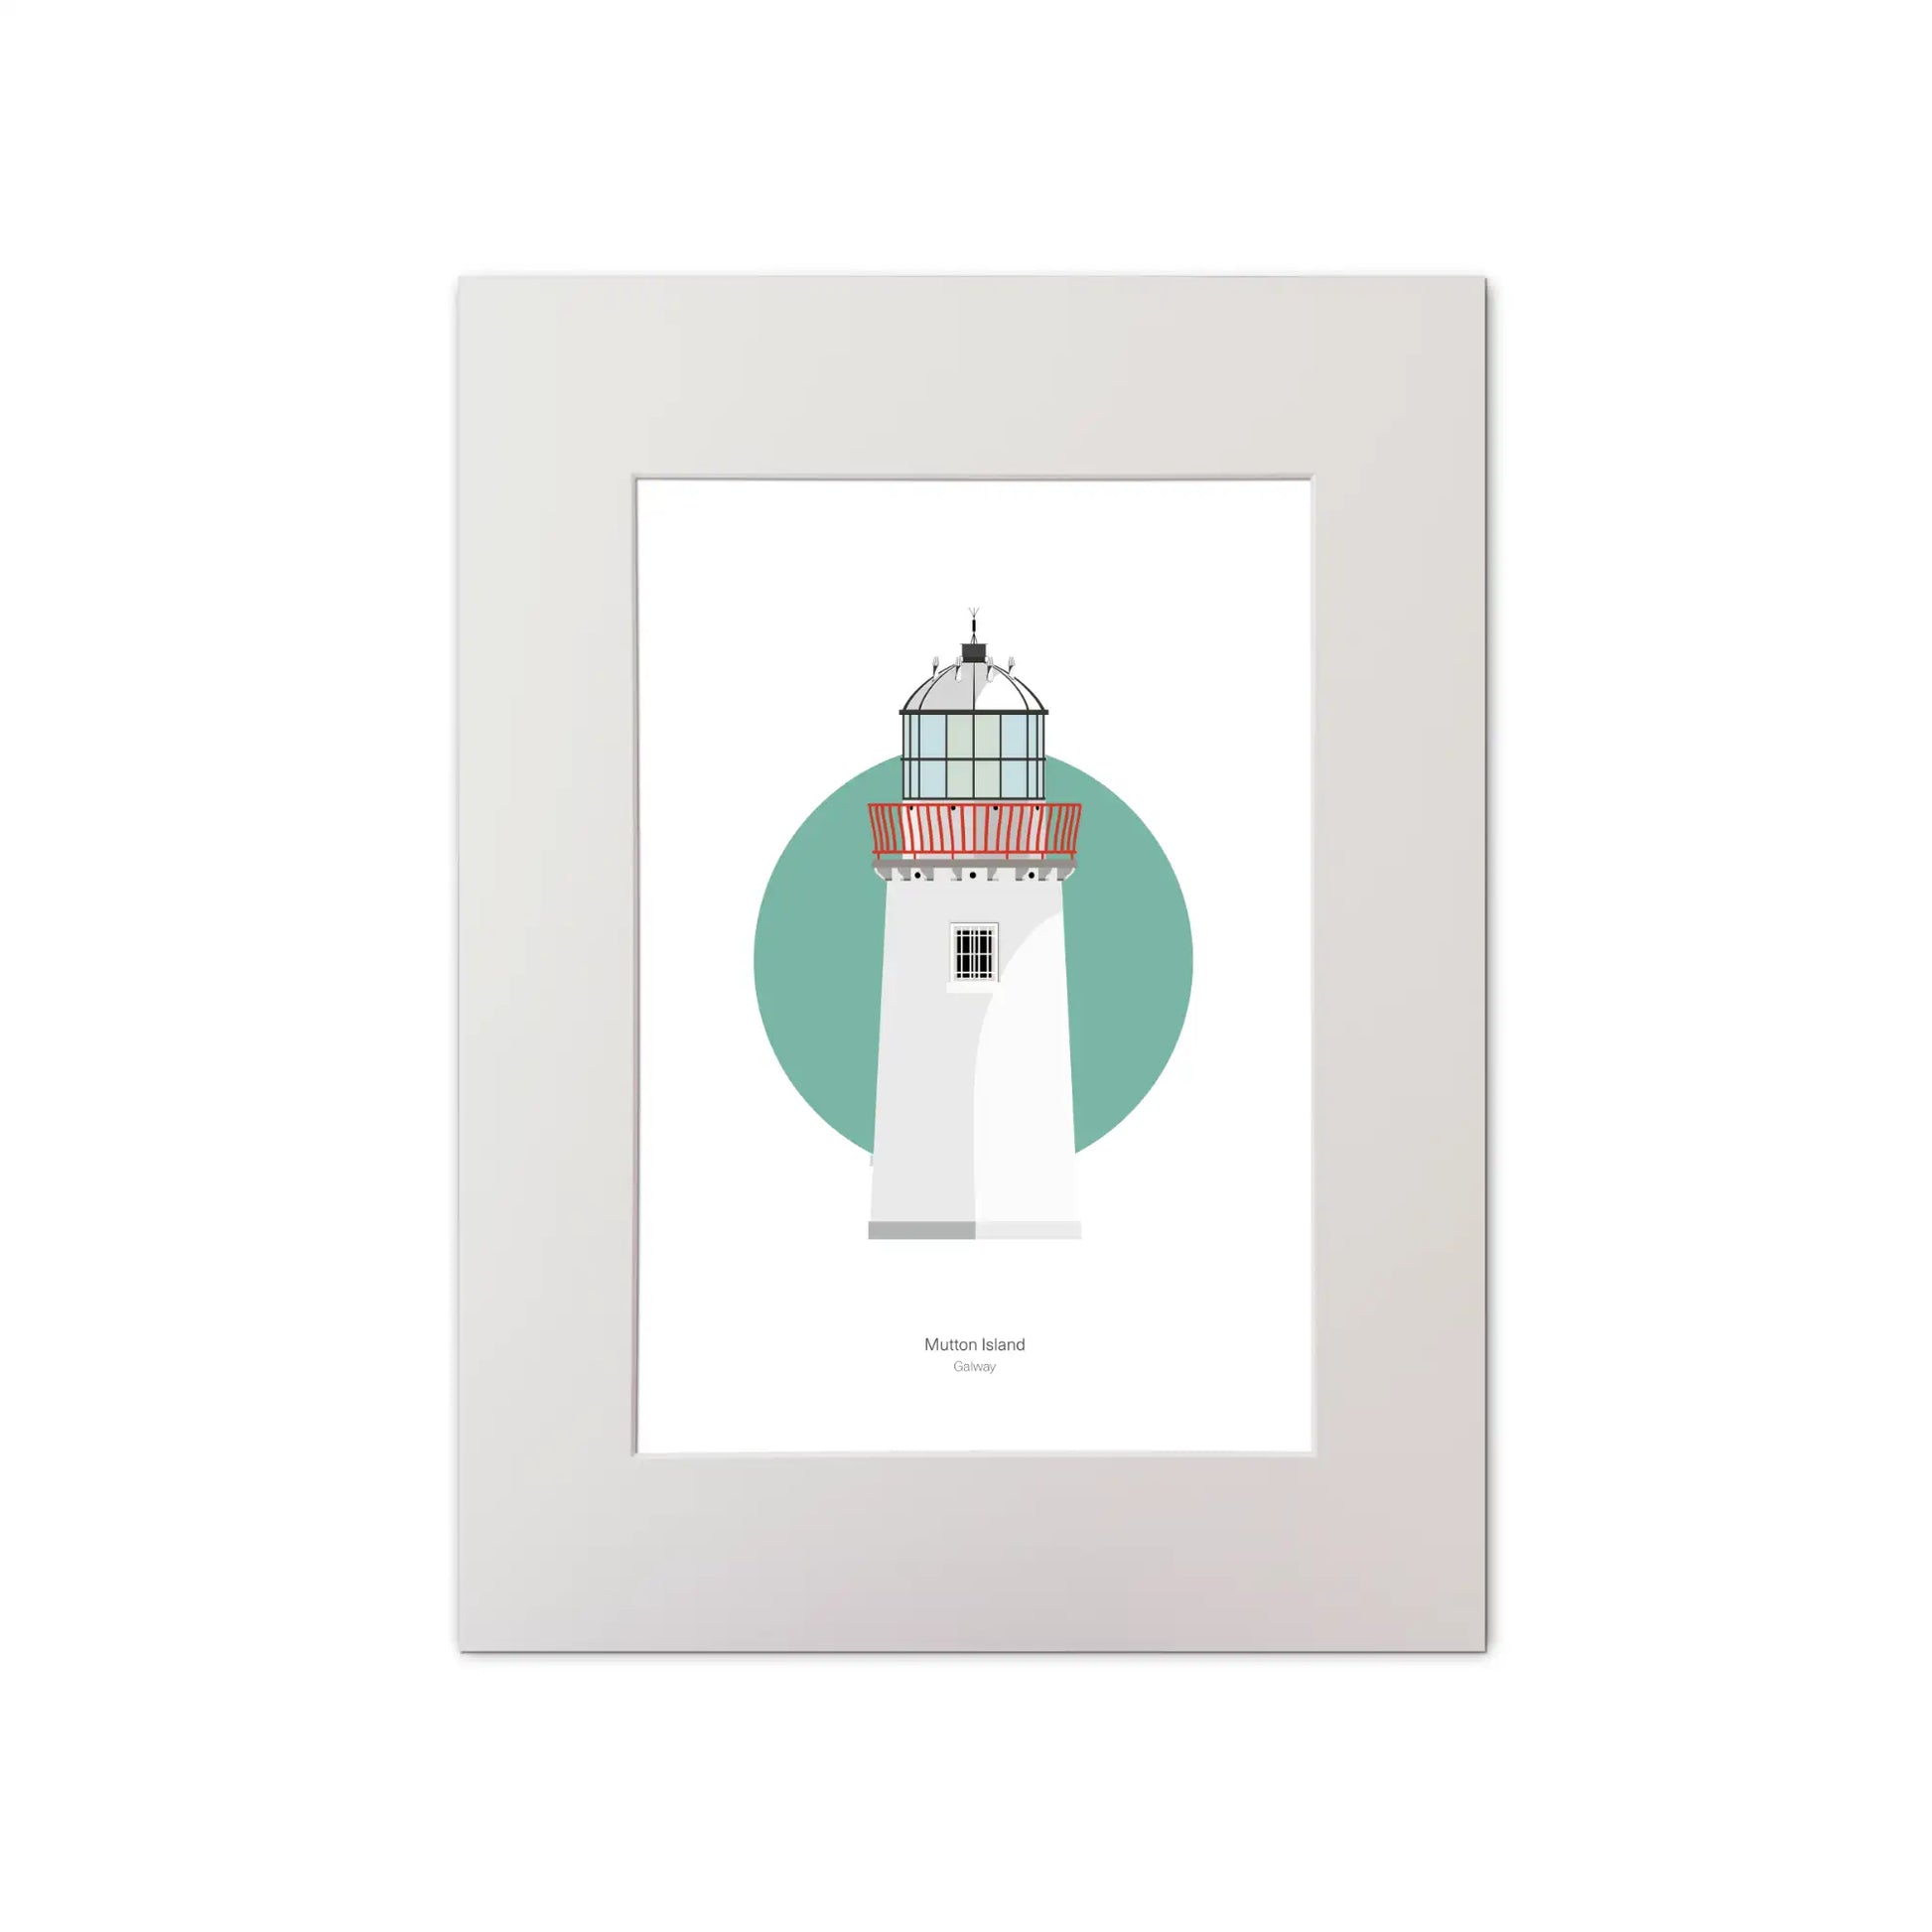 Illustration of Mutton Island lighthouse on a white background inside light blue square, mounted and measuring 30x40cm.